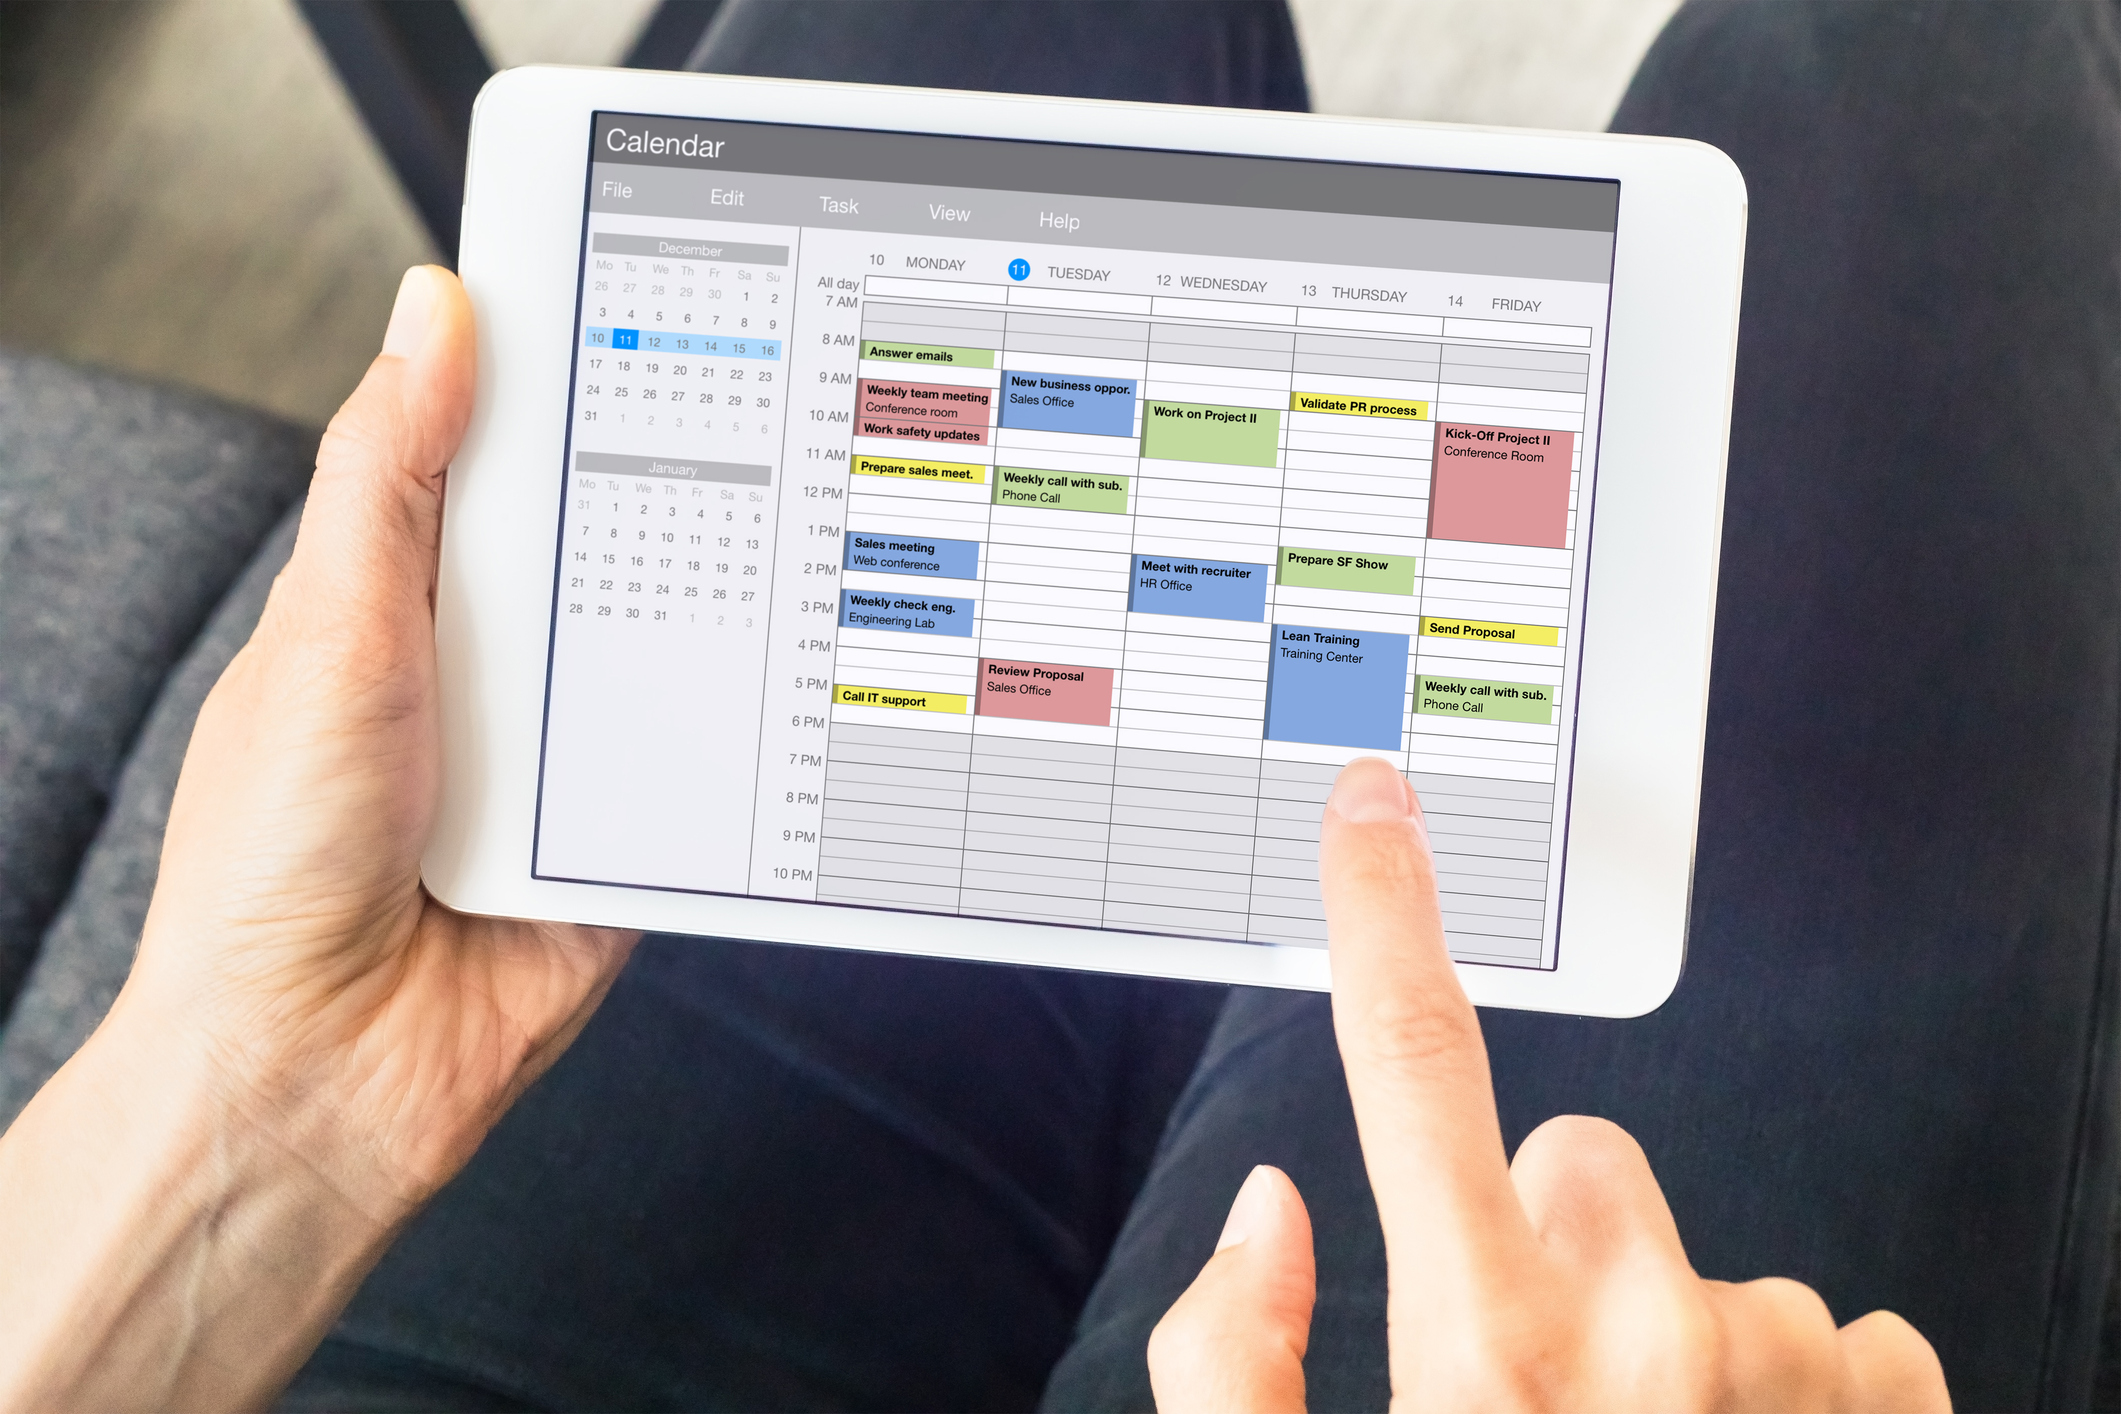 Customer Service Reps Can Have a Hybrid Schedule. Here’s How to Make It Work.